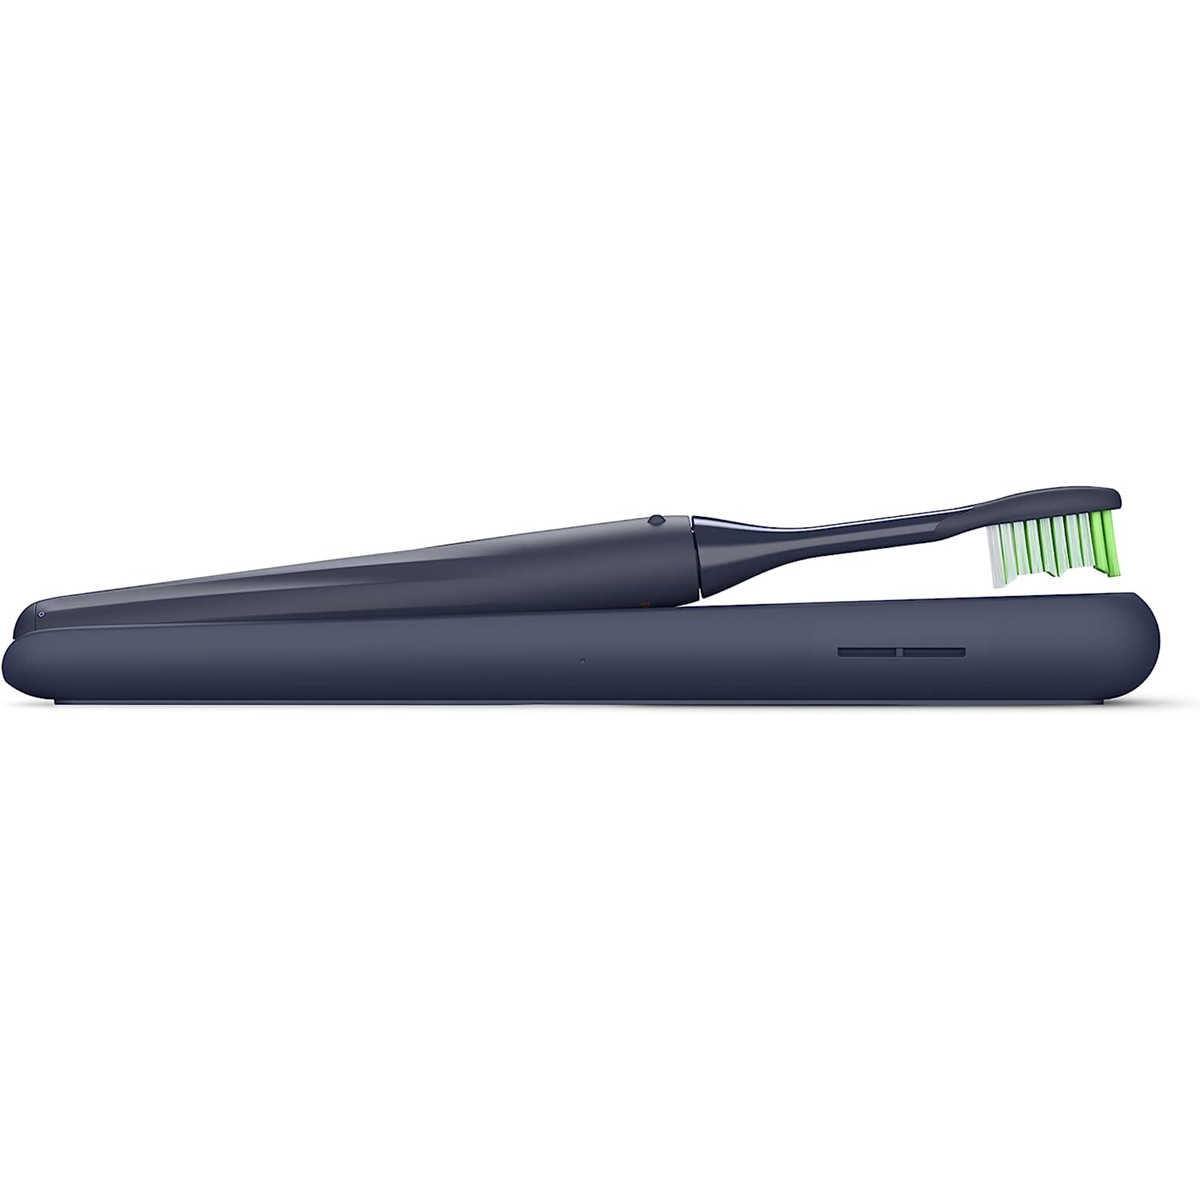 Philips One by Sonicare Battery Toothbrush Midnight Blue HY1100/04 + 2 Philips One by Sonicare Brush head Midnight Blue BH1022/04